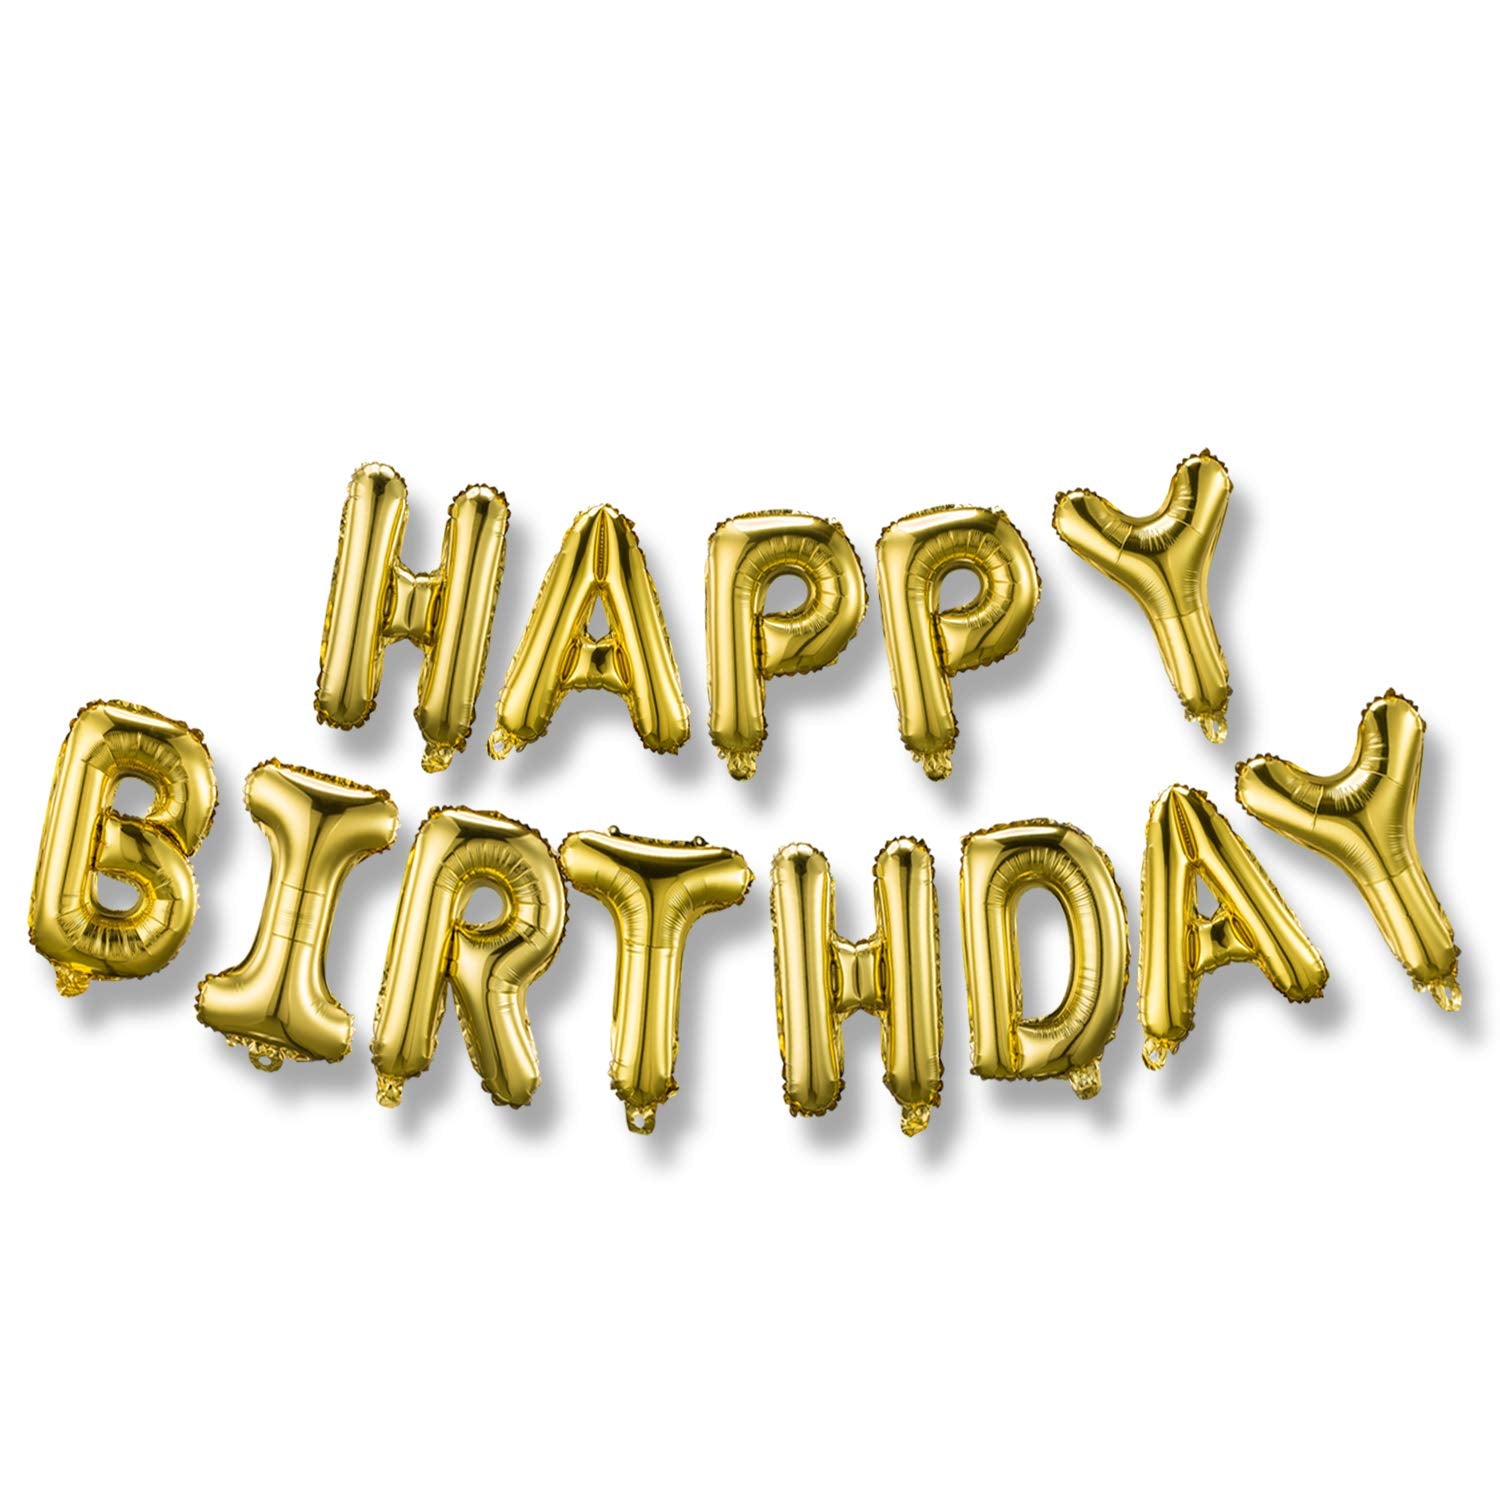 Happy Birthday Banner (3D Gold Lettering) Mylar Foil Letters | Inflatable Party Decor and Event Decorations for Kids and Adults | Reusable, Ecofriendly Fun